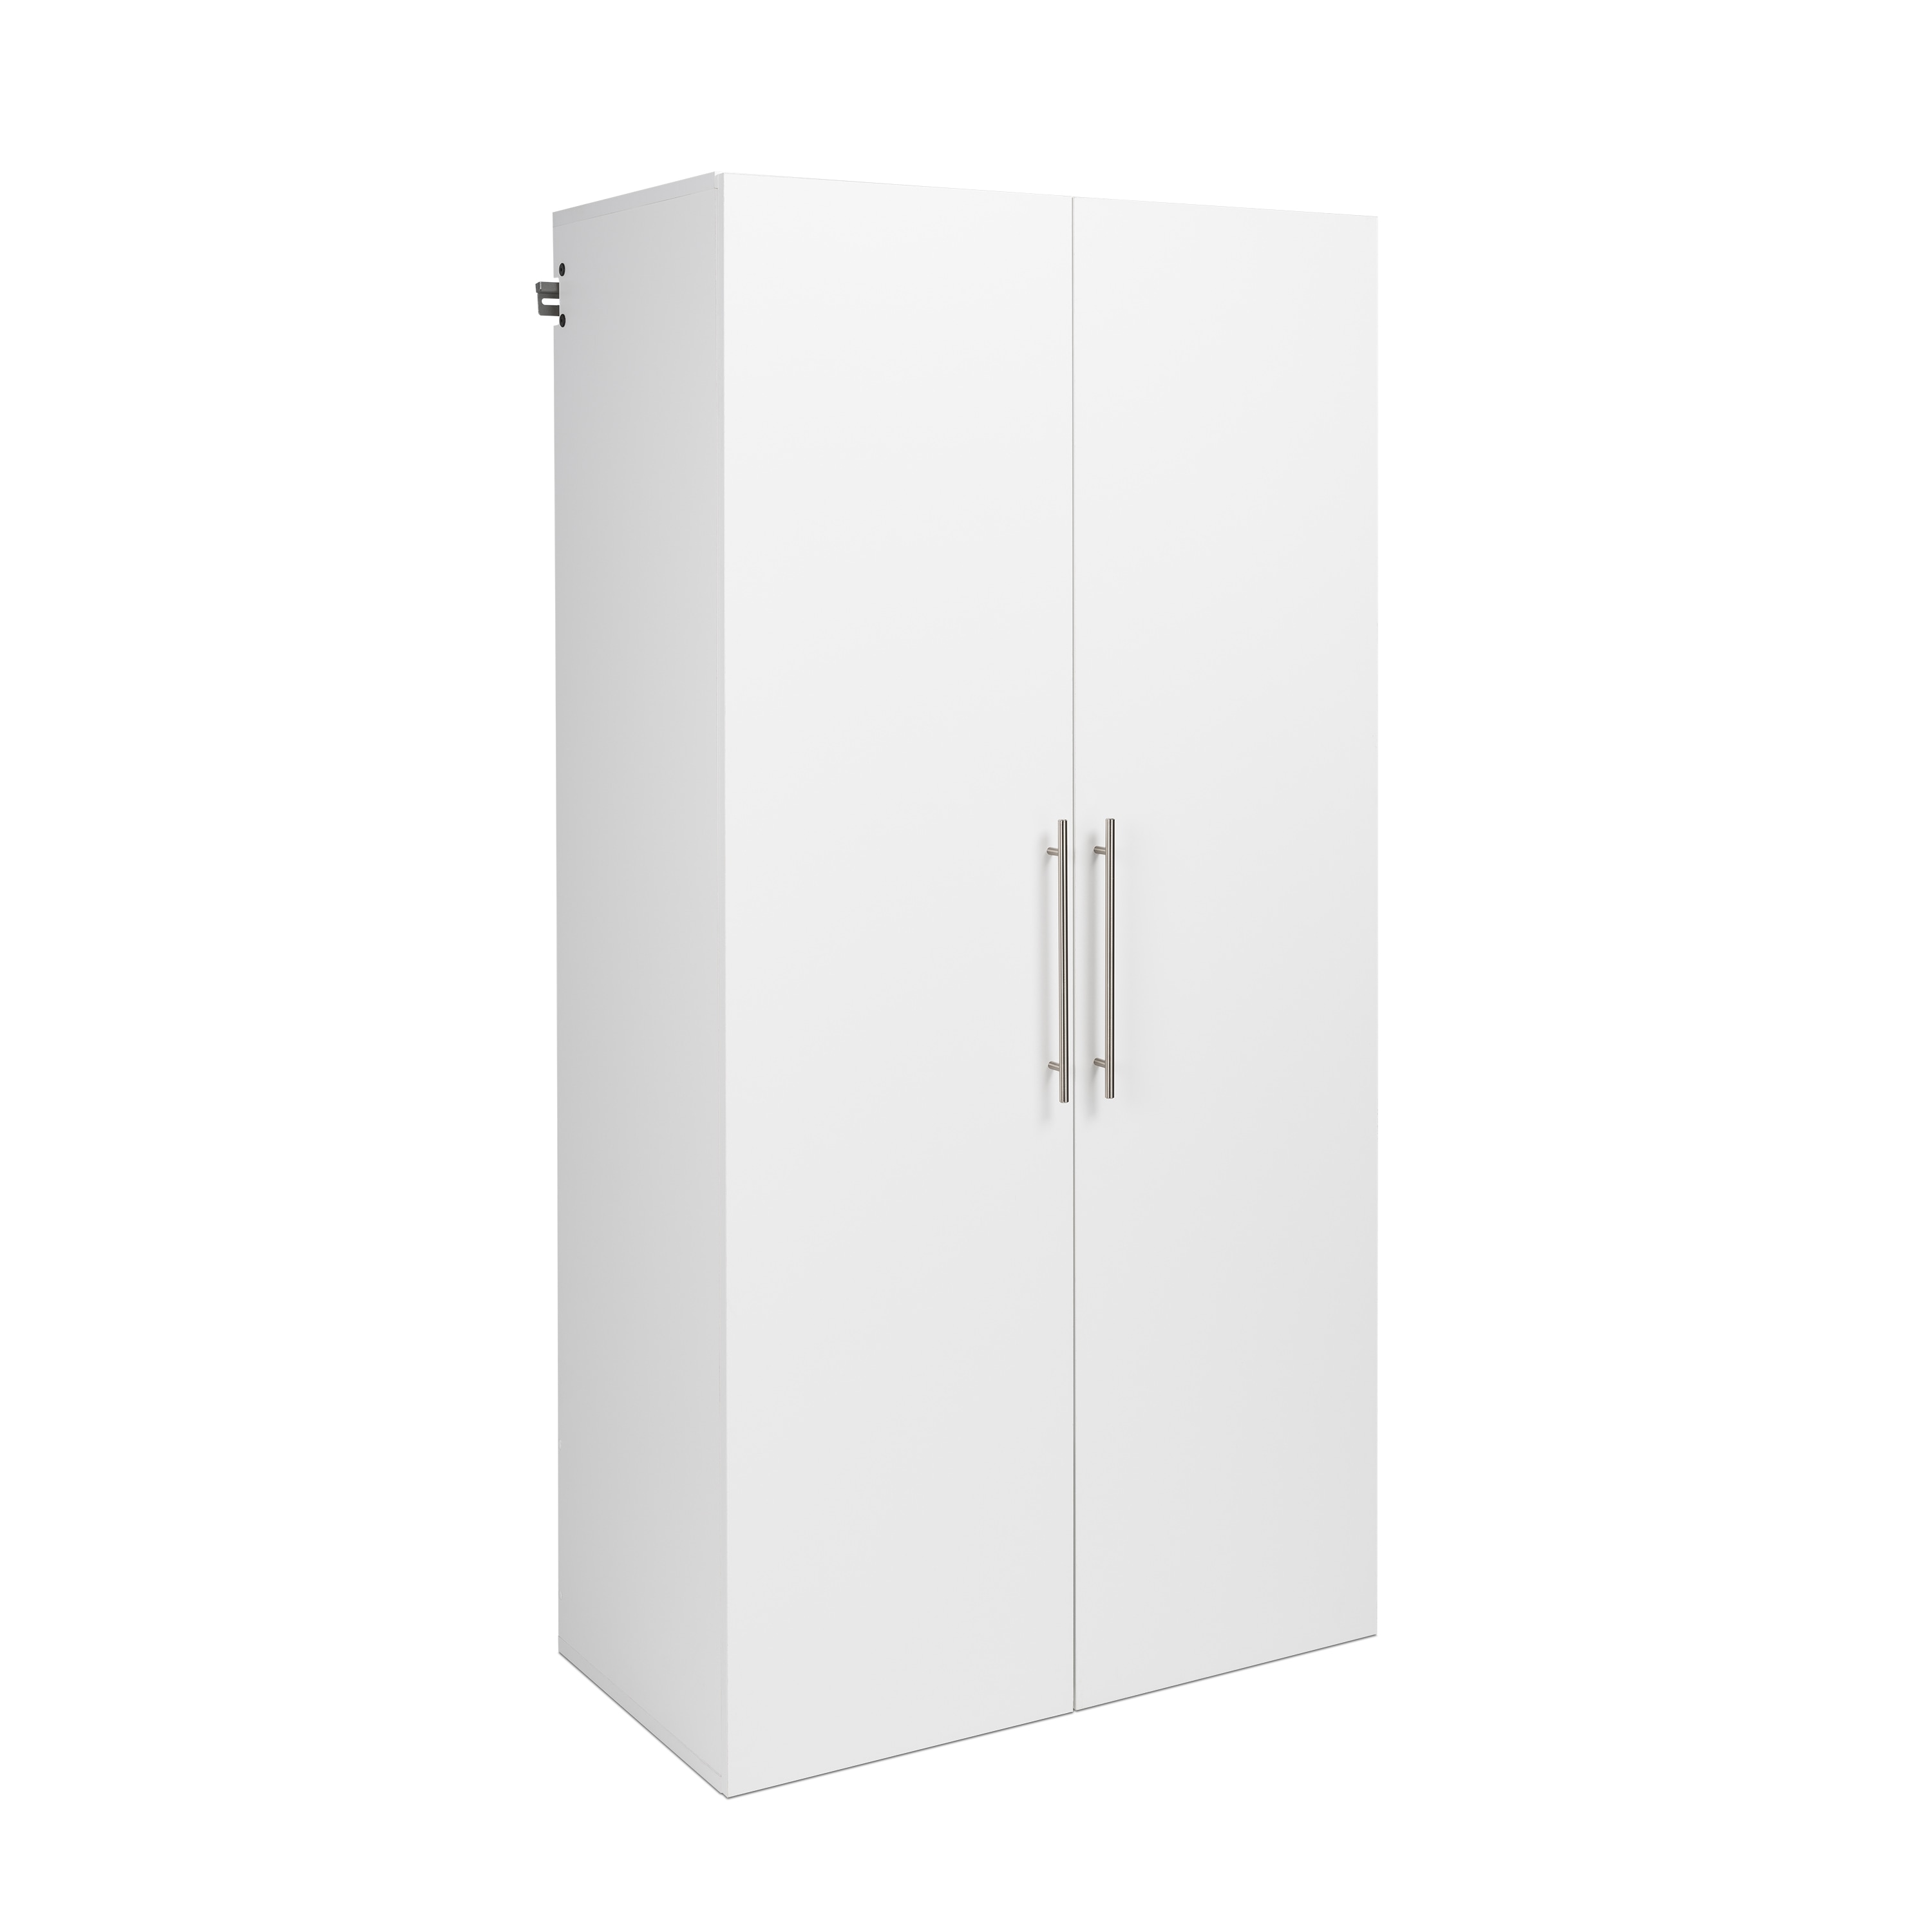 Prepac HangUps Composite Wood Wall-mounted Garage Cabinet in White